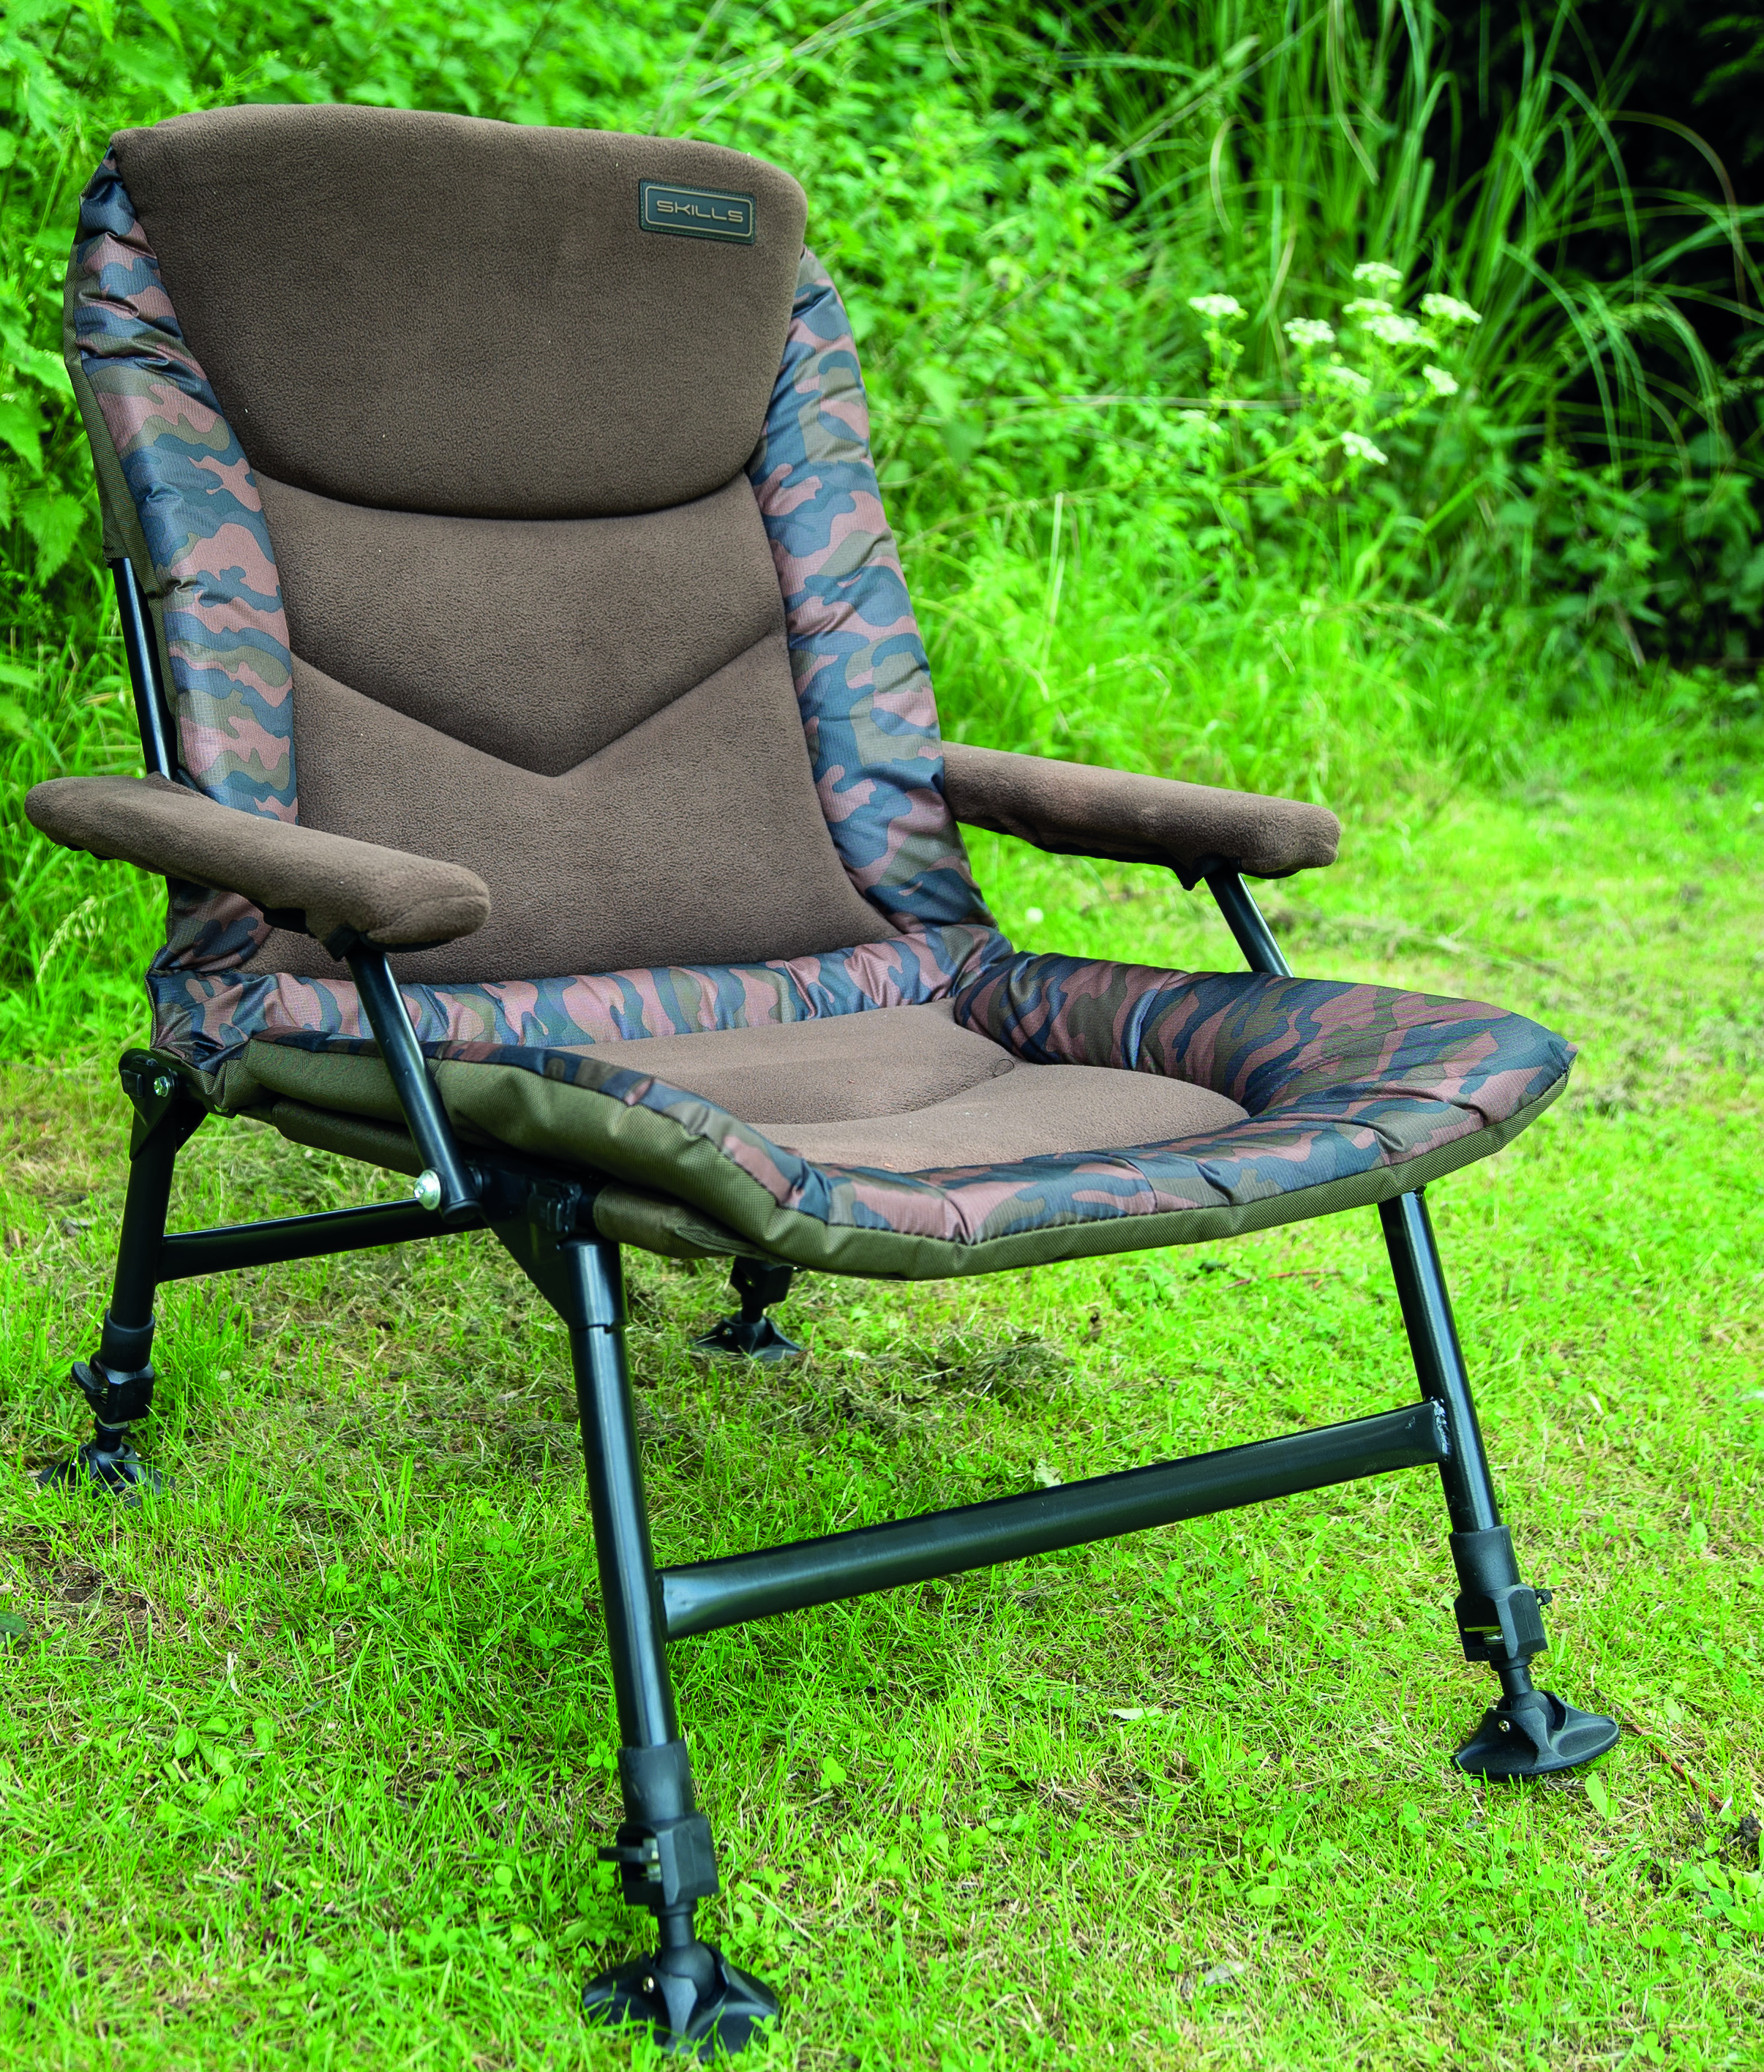 [Bundle] Lucx® fishing chair, “El Presidente” carp chair+carry bag,  carpchair, camping chair, garden chair with armrests | Lucx Angelsport |  fishing